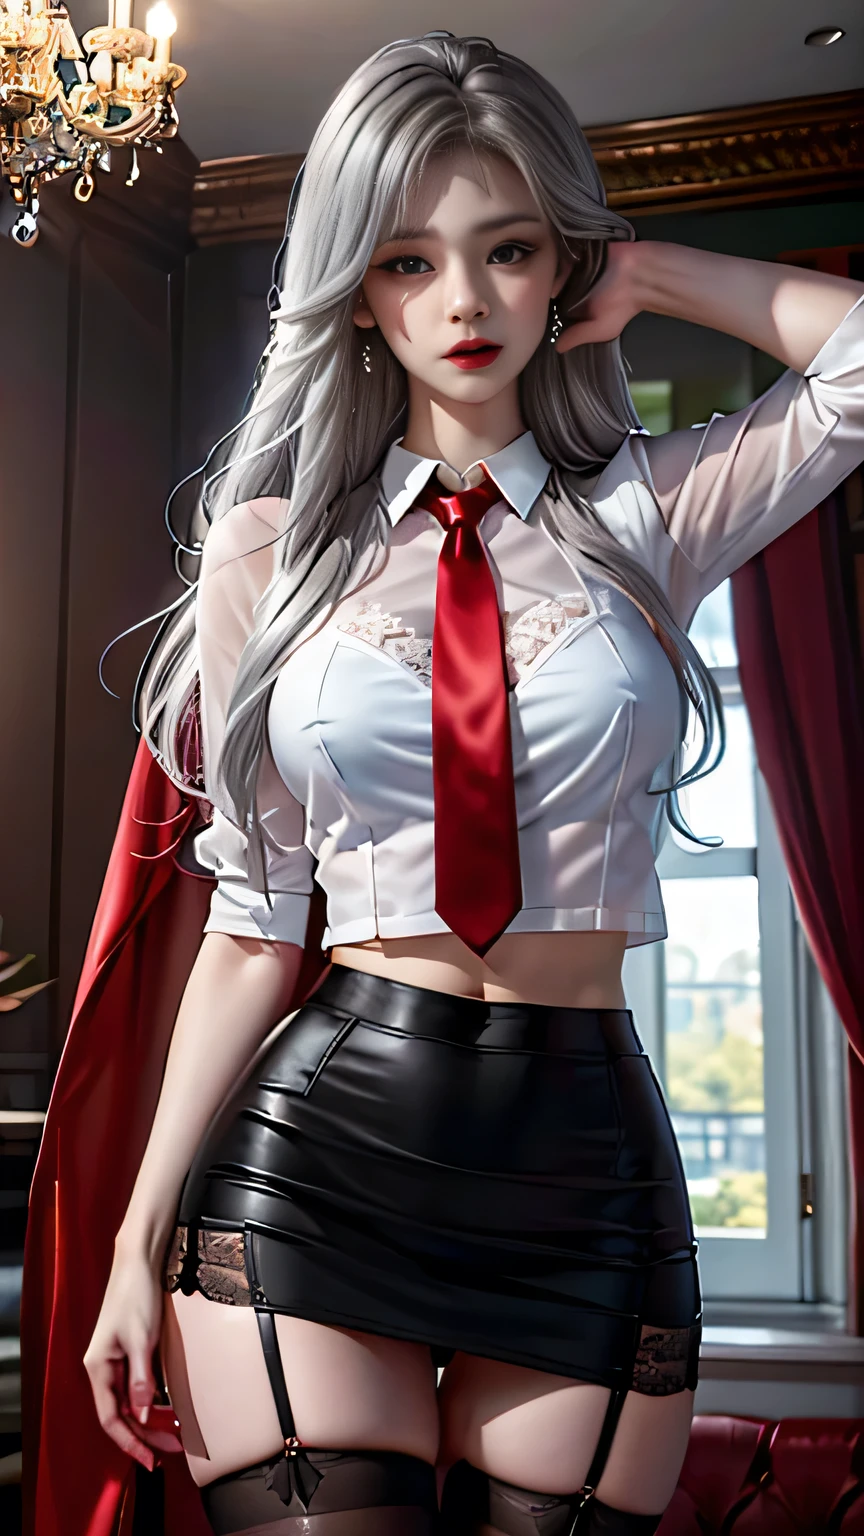 Girl portrait photography, Realistic, High resolution, 1 female, alone, Upper Body, Beautiful Eyes, Close your lips, Detailed face, Gray Hair, Long Hair, Collared shirt, Red tie,Black Skirt, Pencil Skirt,, stockings,(Black lace panties are visible)